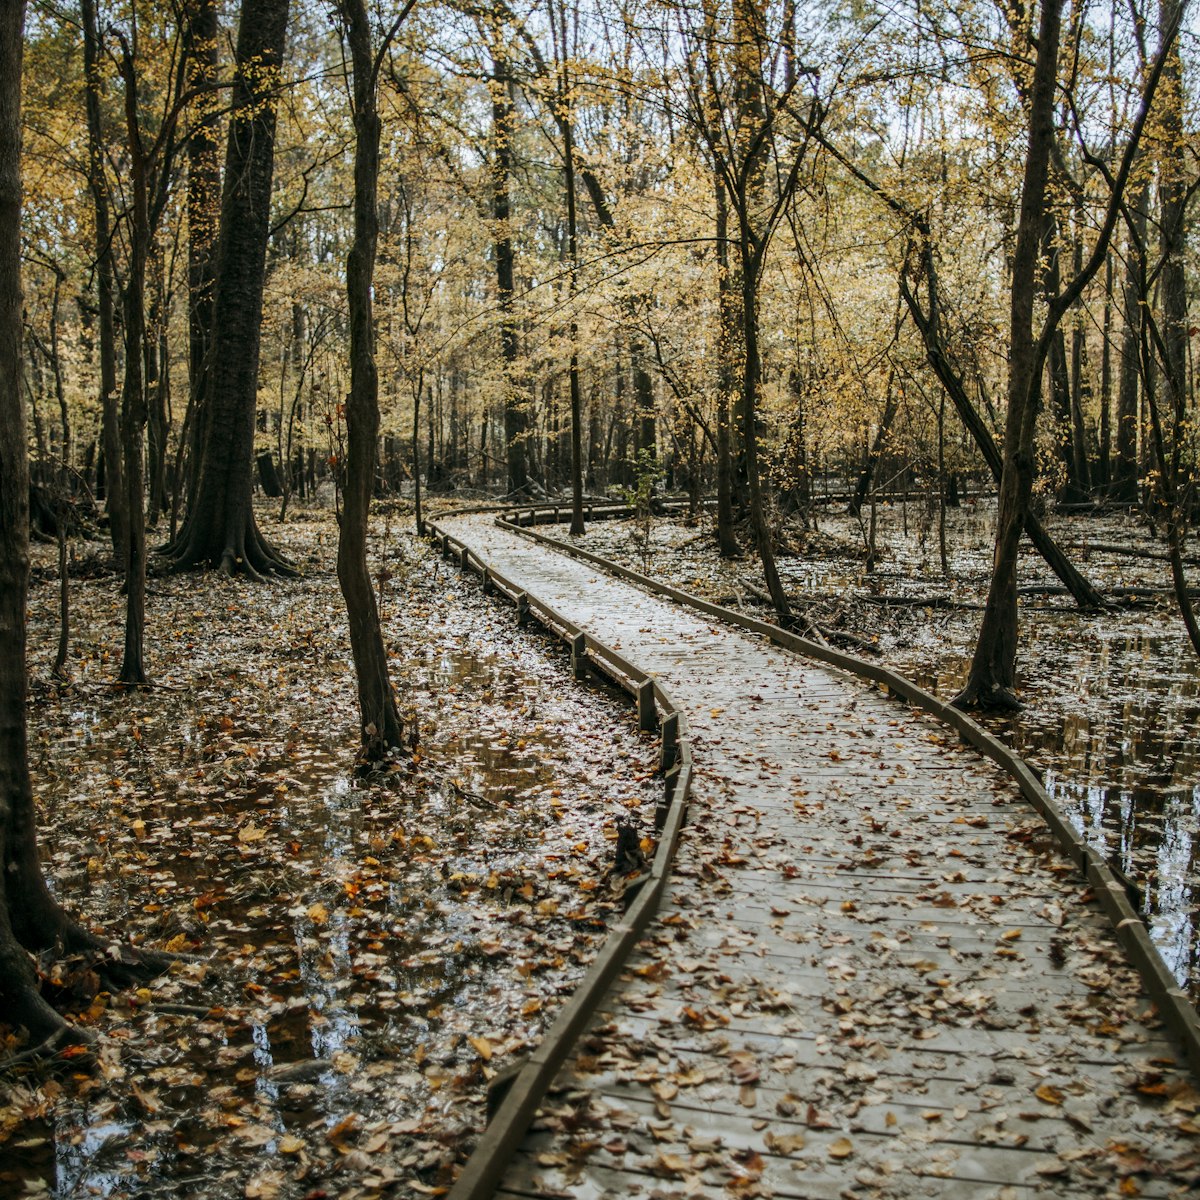 A boardwalk through the swamps of Congaree National Park during the fall.